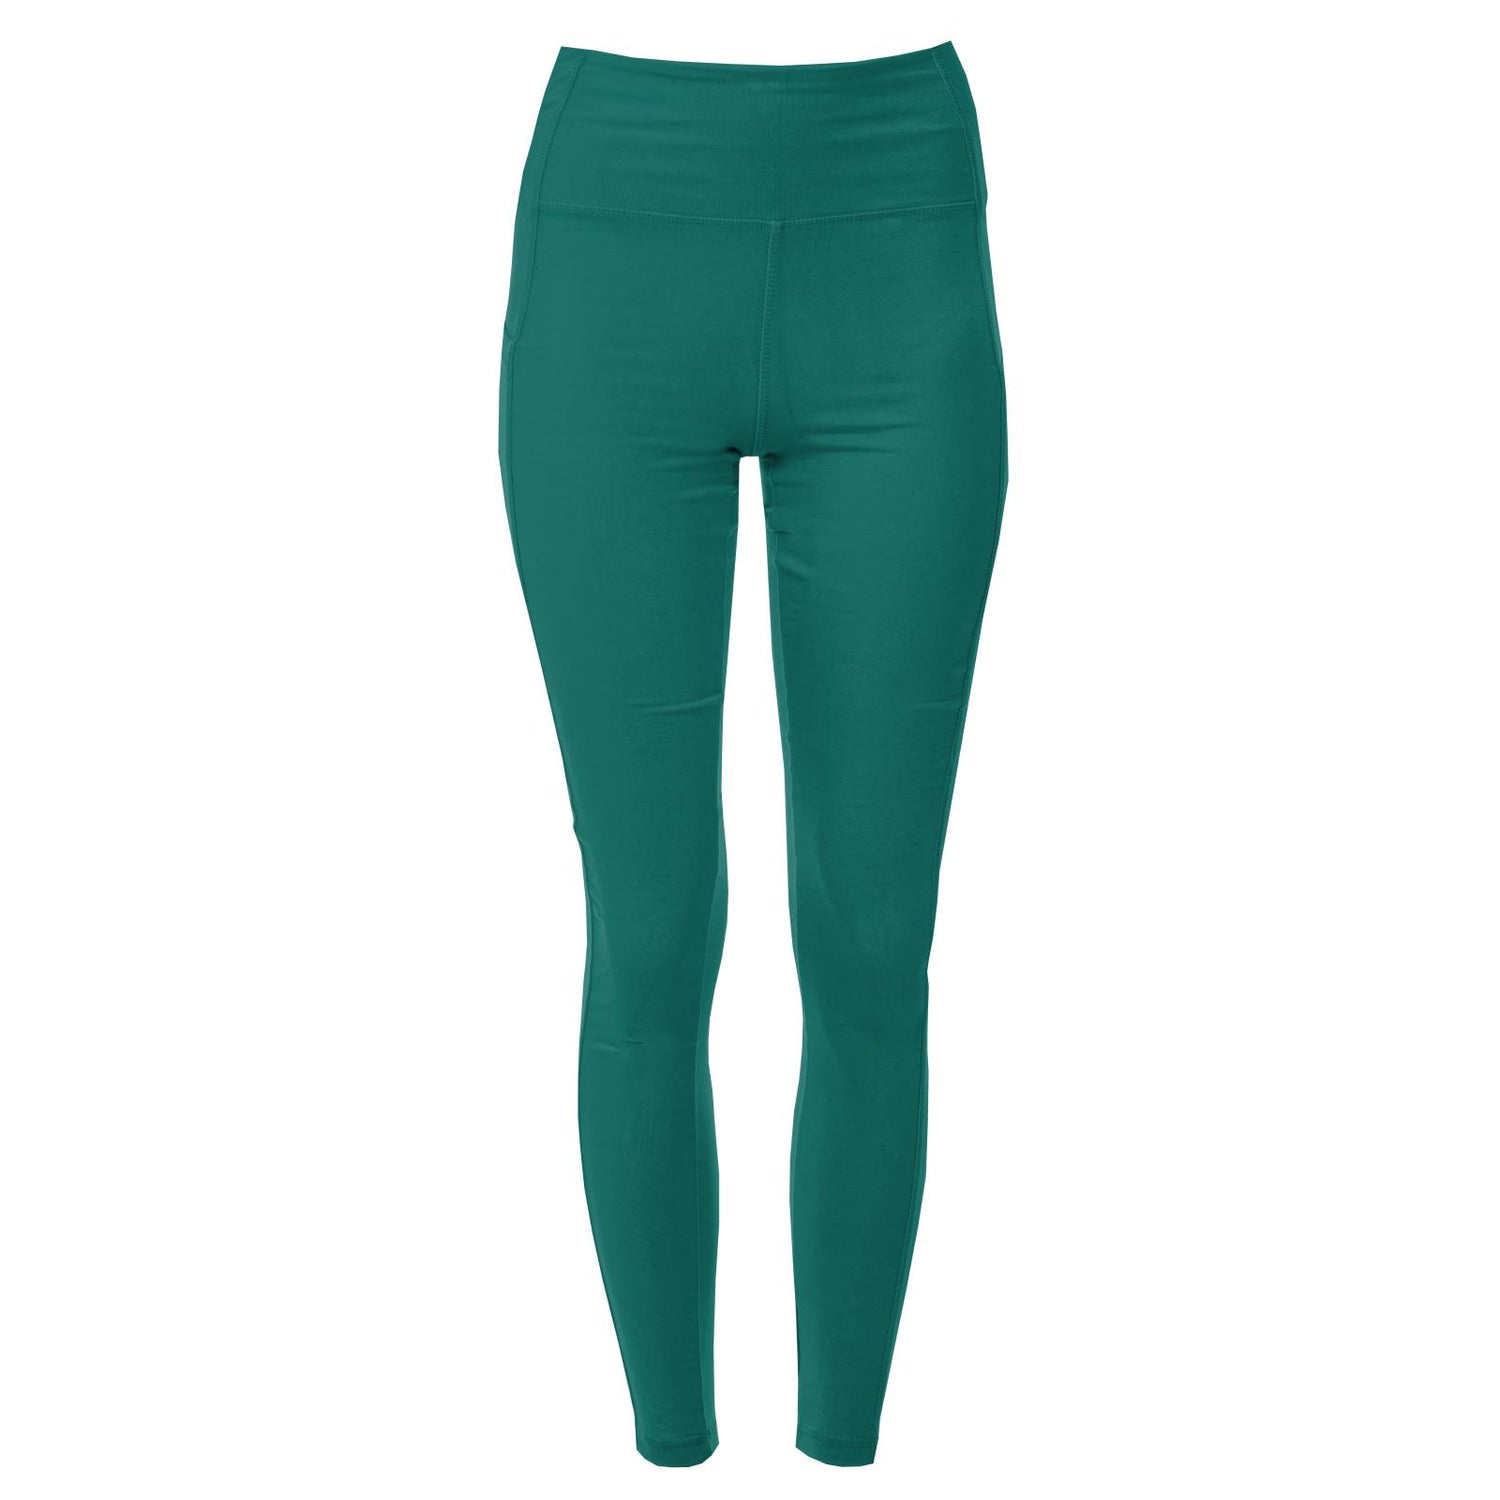 Women's Solid Luxe Stretch Leggings with Pockets in Ivy